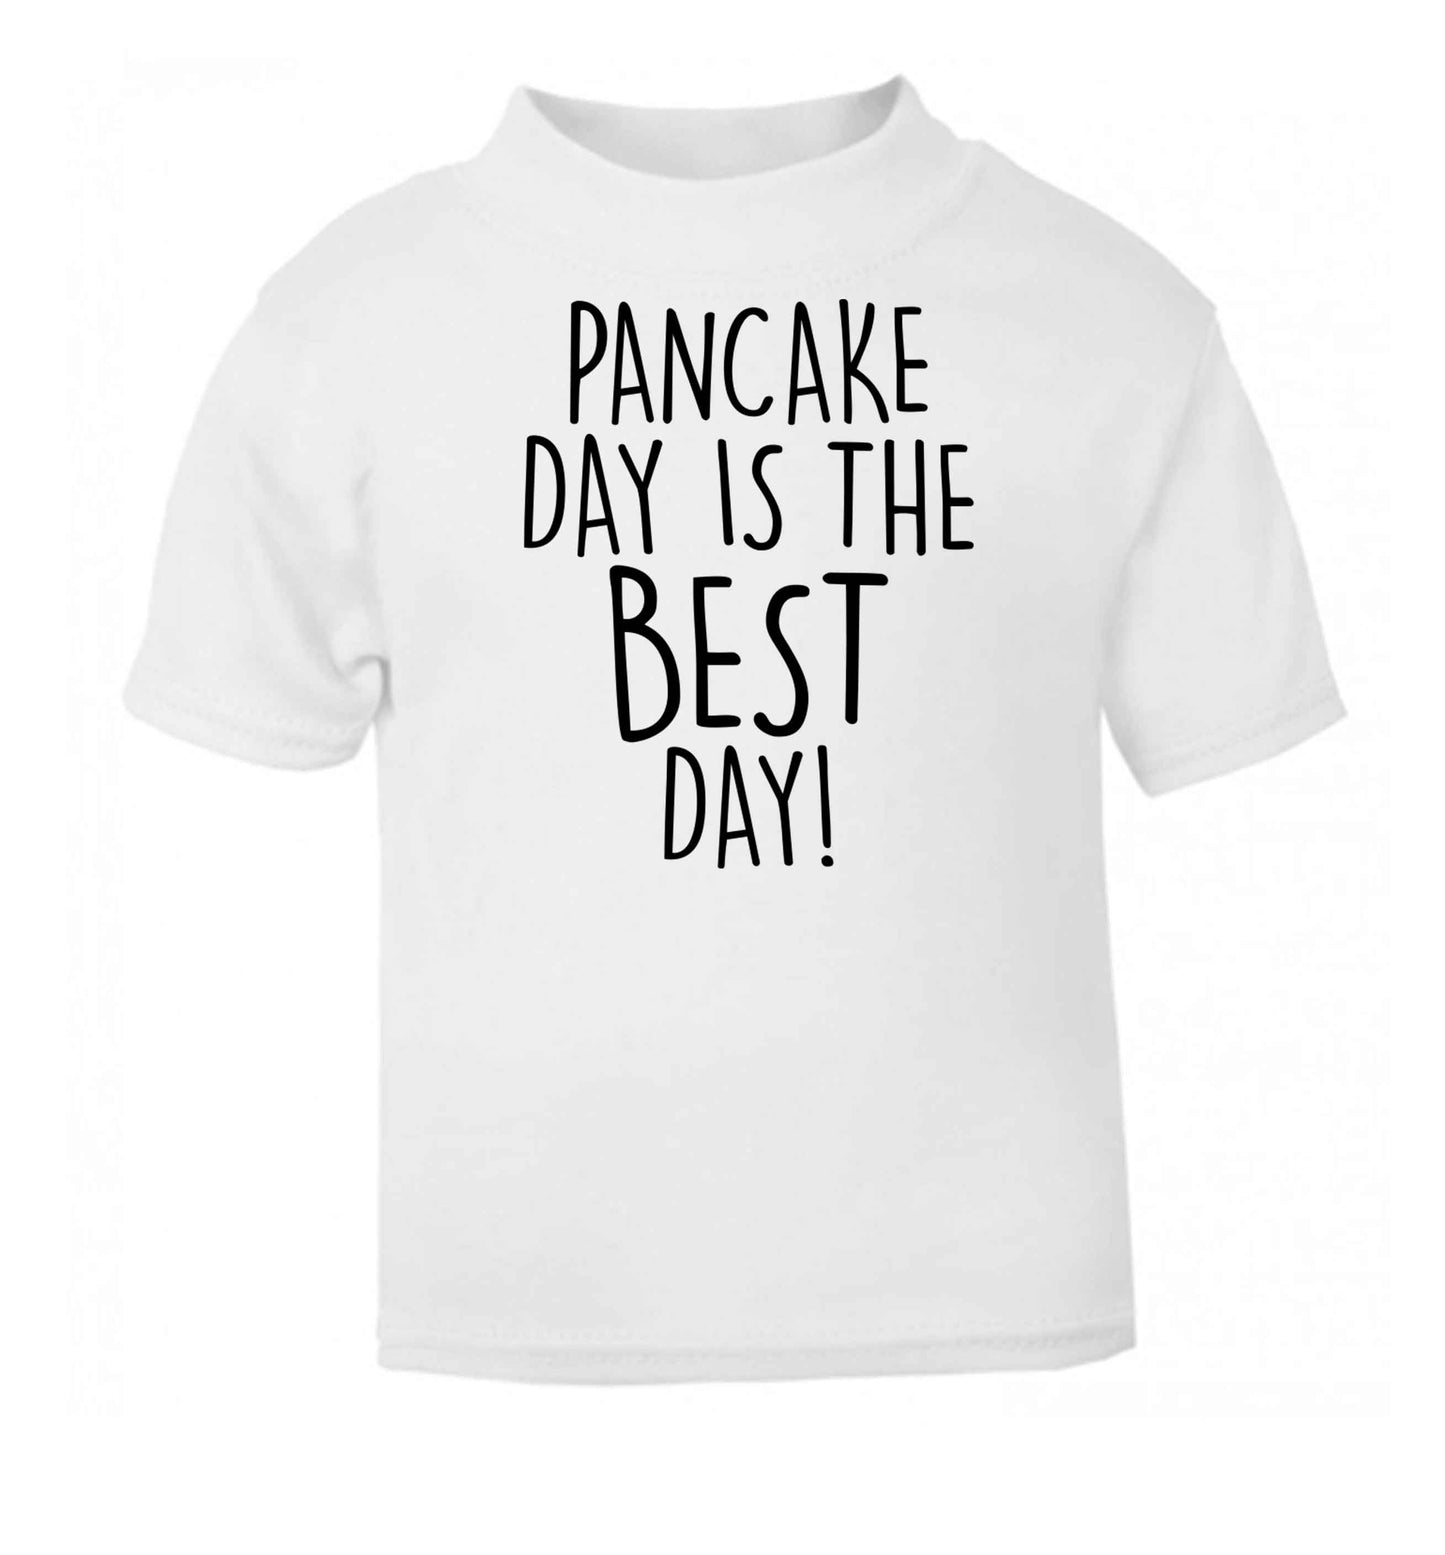 Pancake day is the best day white baby toddler Tshirt 2 Years